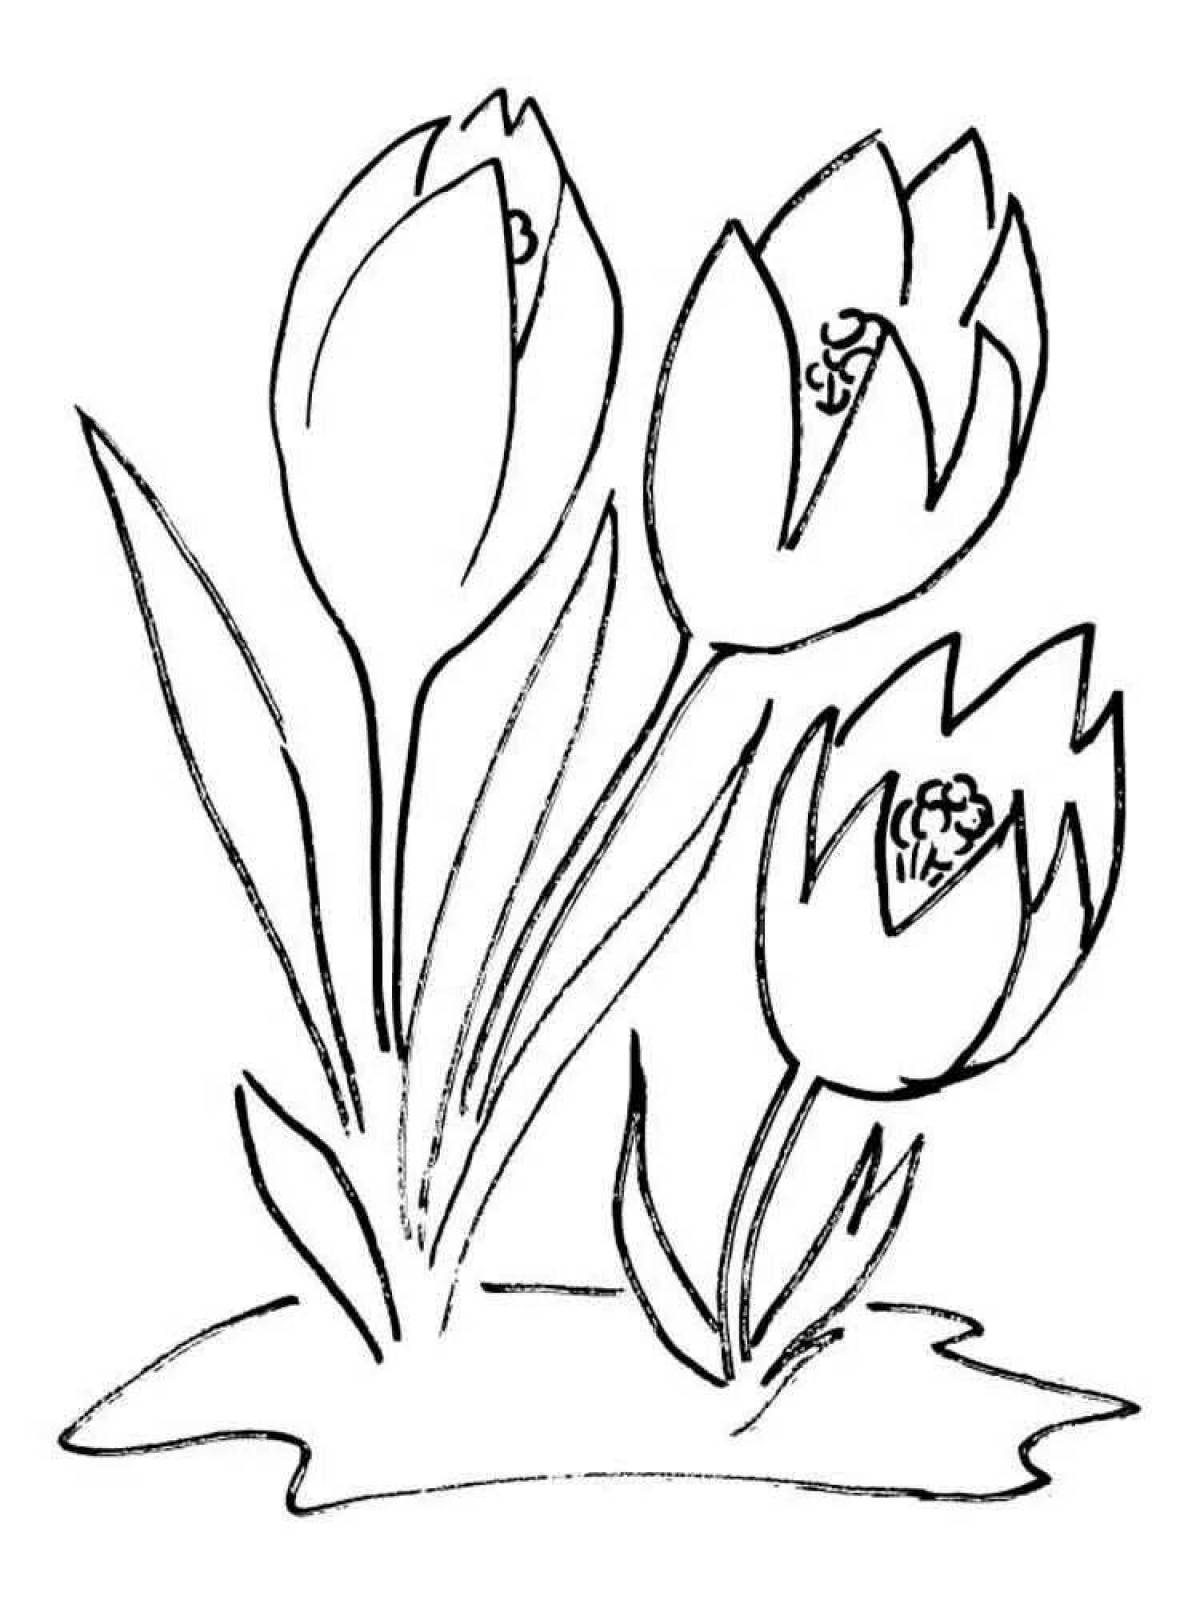 Coloring page inviting grass